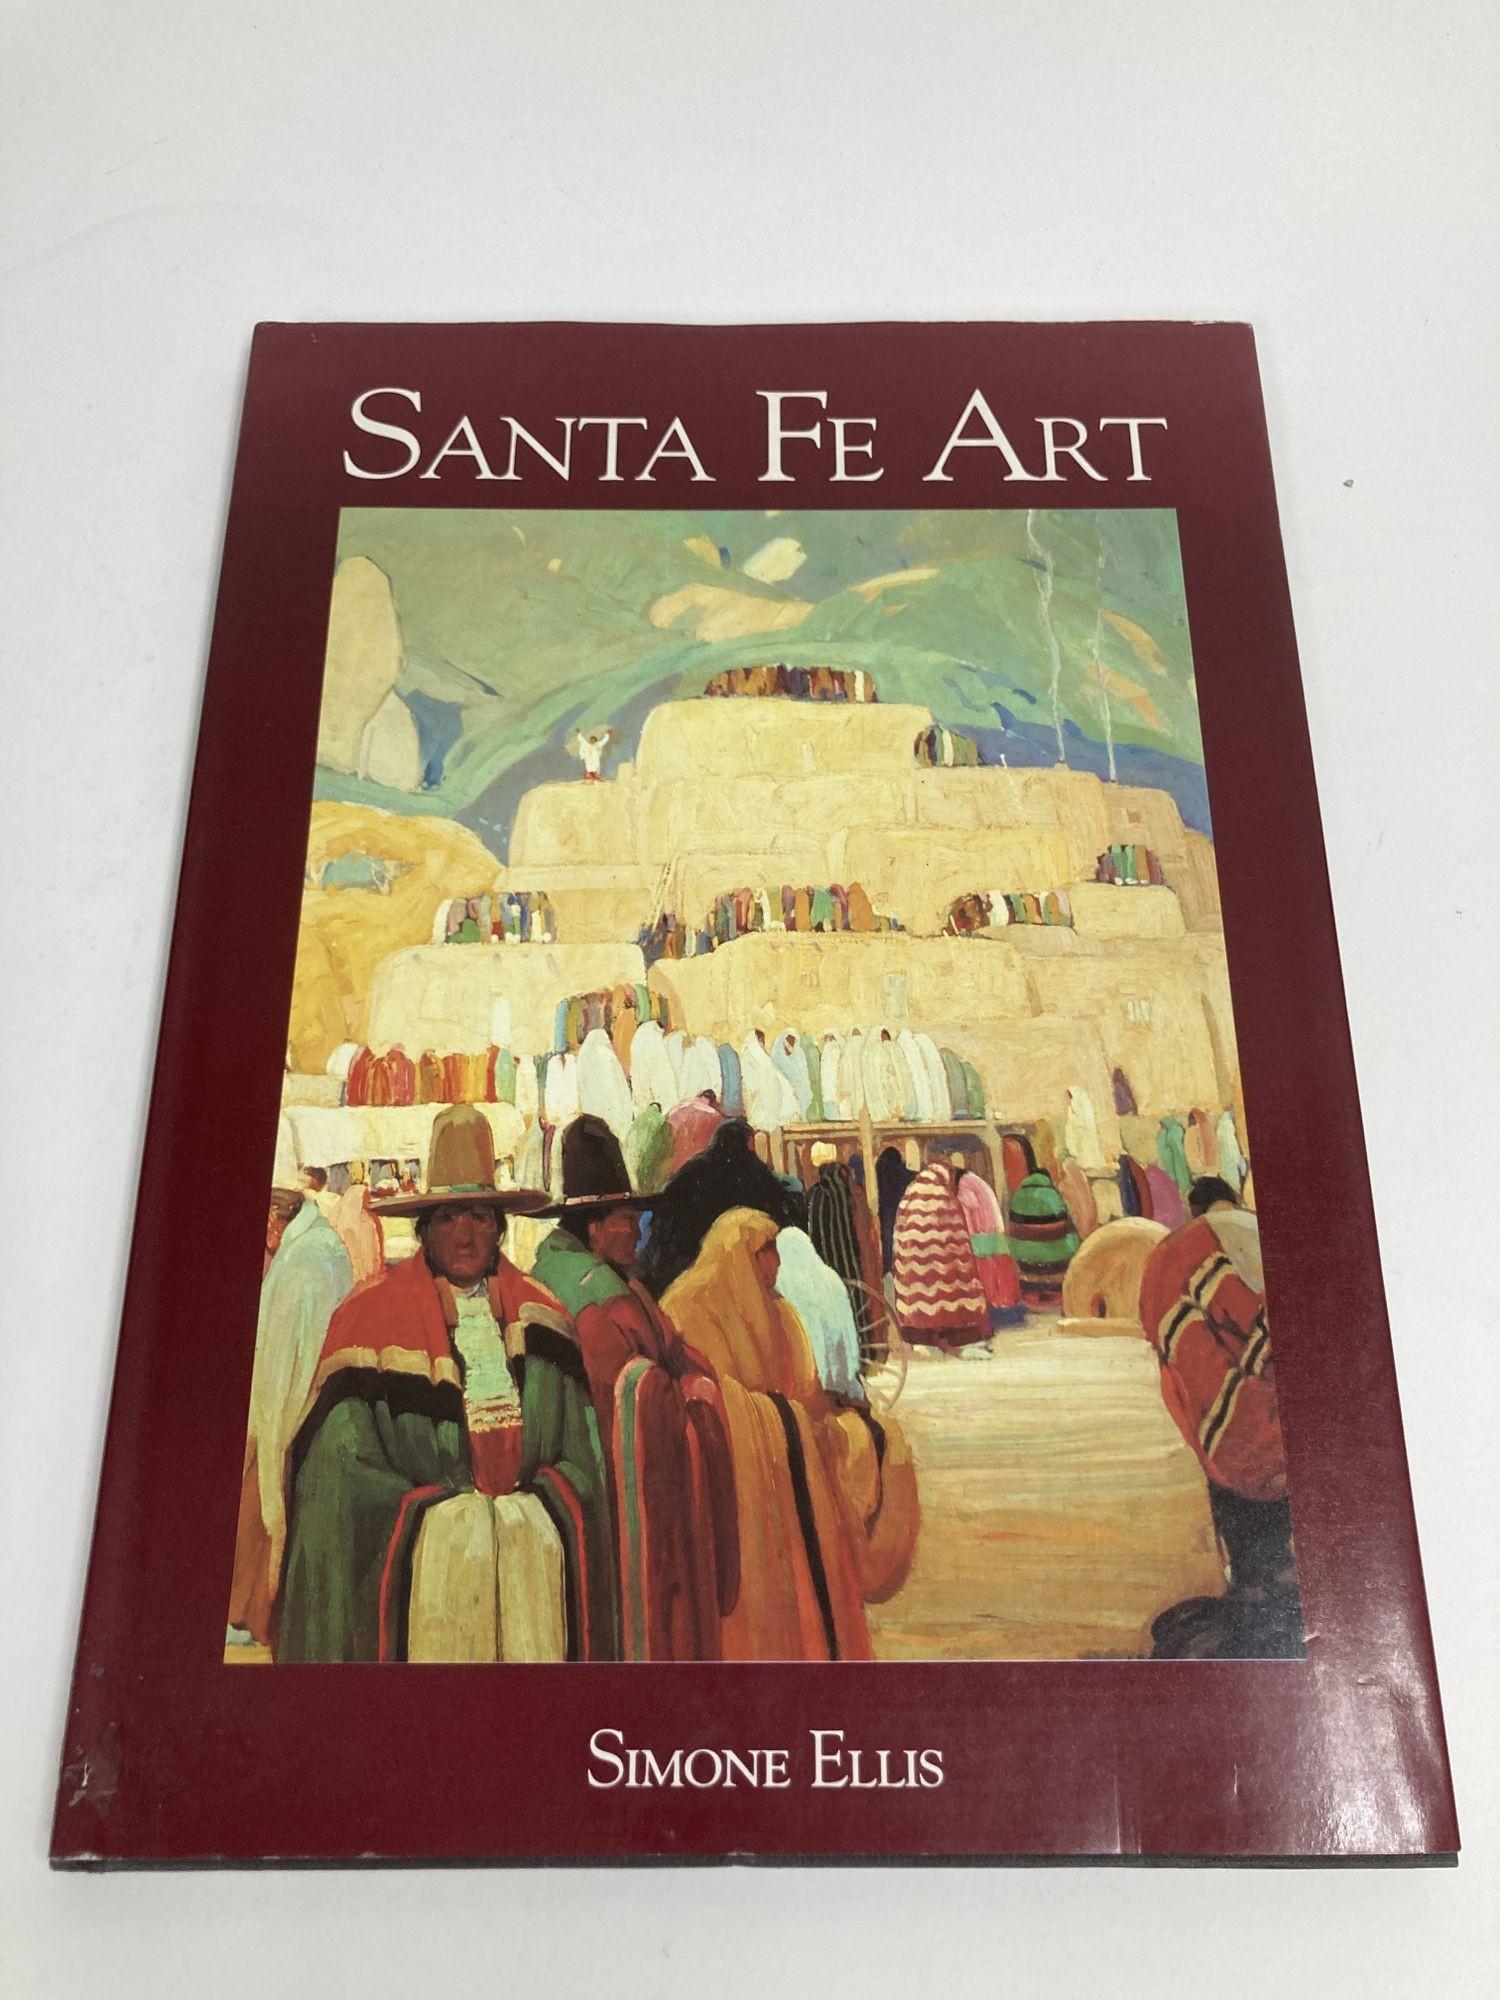 Santa Fe Art. Ellis, Simone. Published by Crescent Books., New York., 1993.
Large hardcover book.
Illustrated in black, white and color. Important reference work.
Title: Santa Fe Art.
Publisher: Crescent Books., New York.
Publication Date: